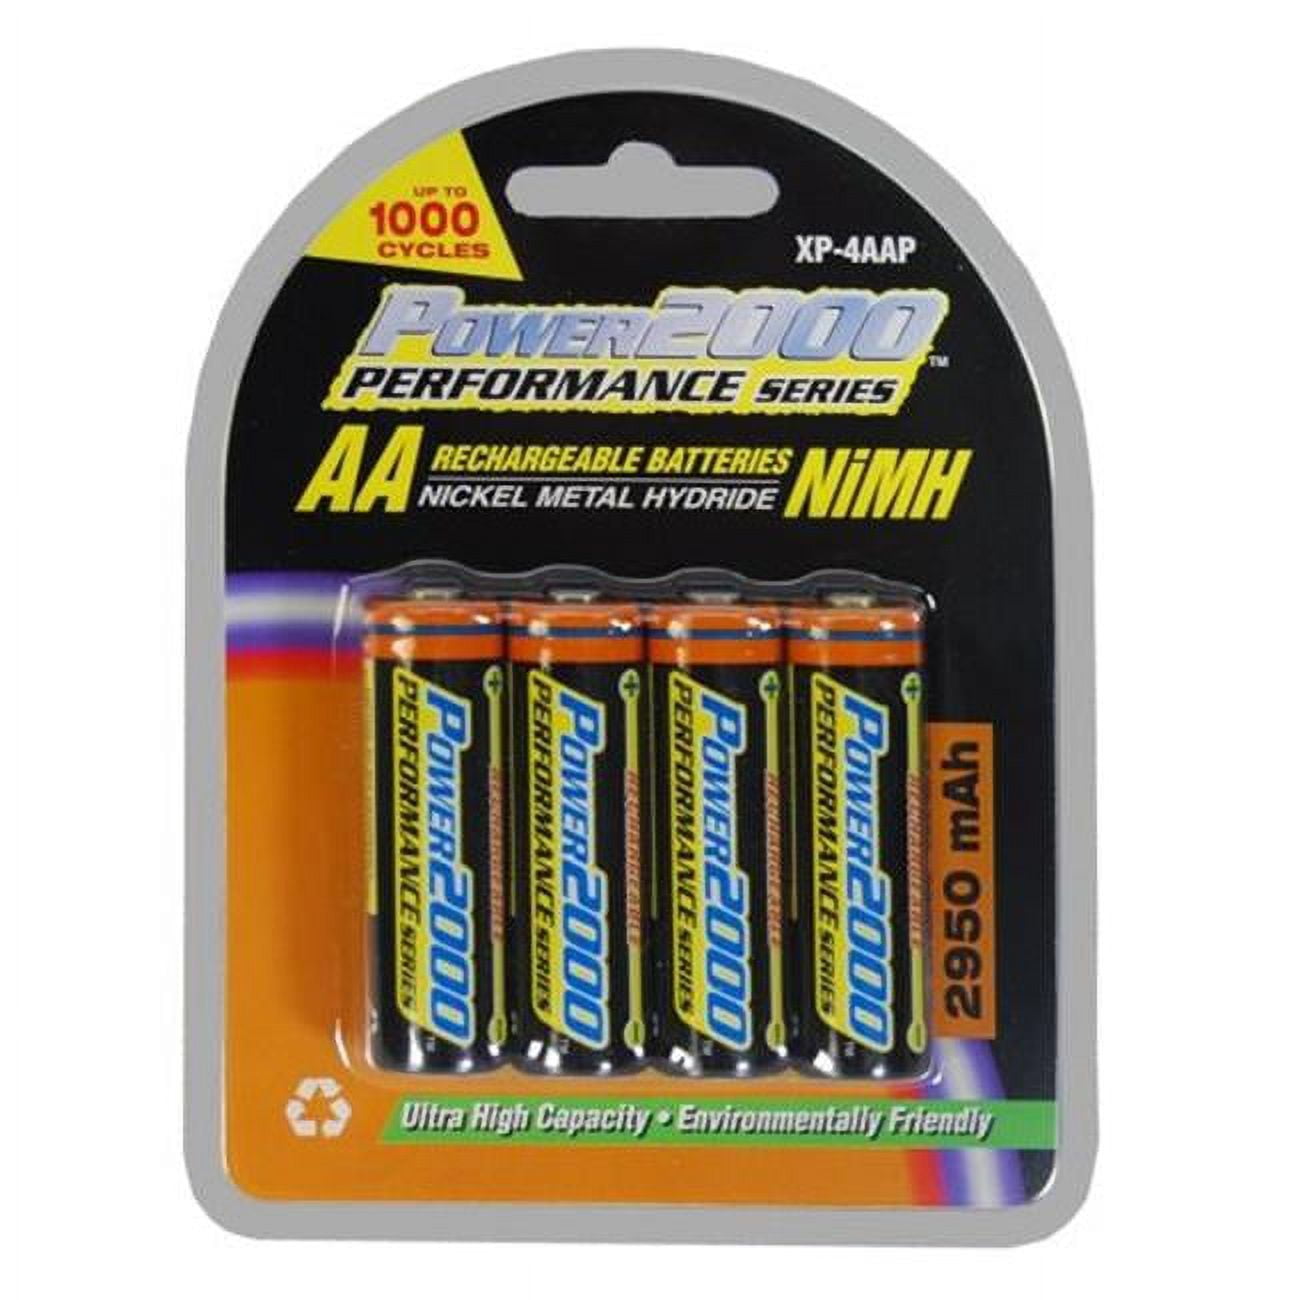 Picture of Miscellaneous XP10AA Power2000 Performance Series - 2,950 Mah 10 Pack Nickle Metal Hydride Aa Rechargeable Batteries